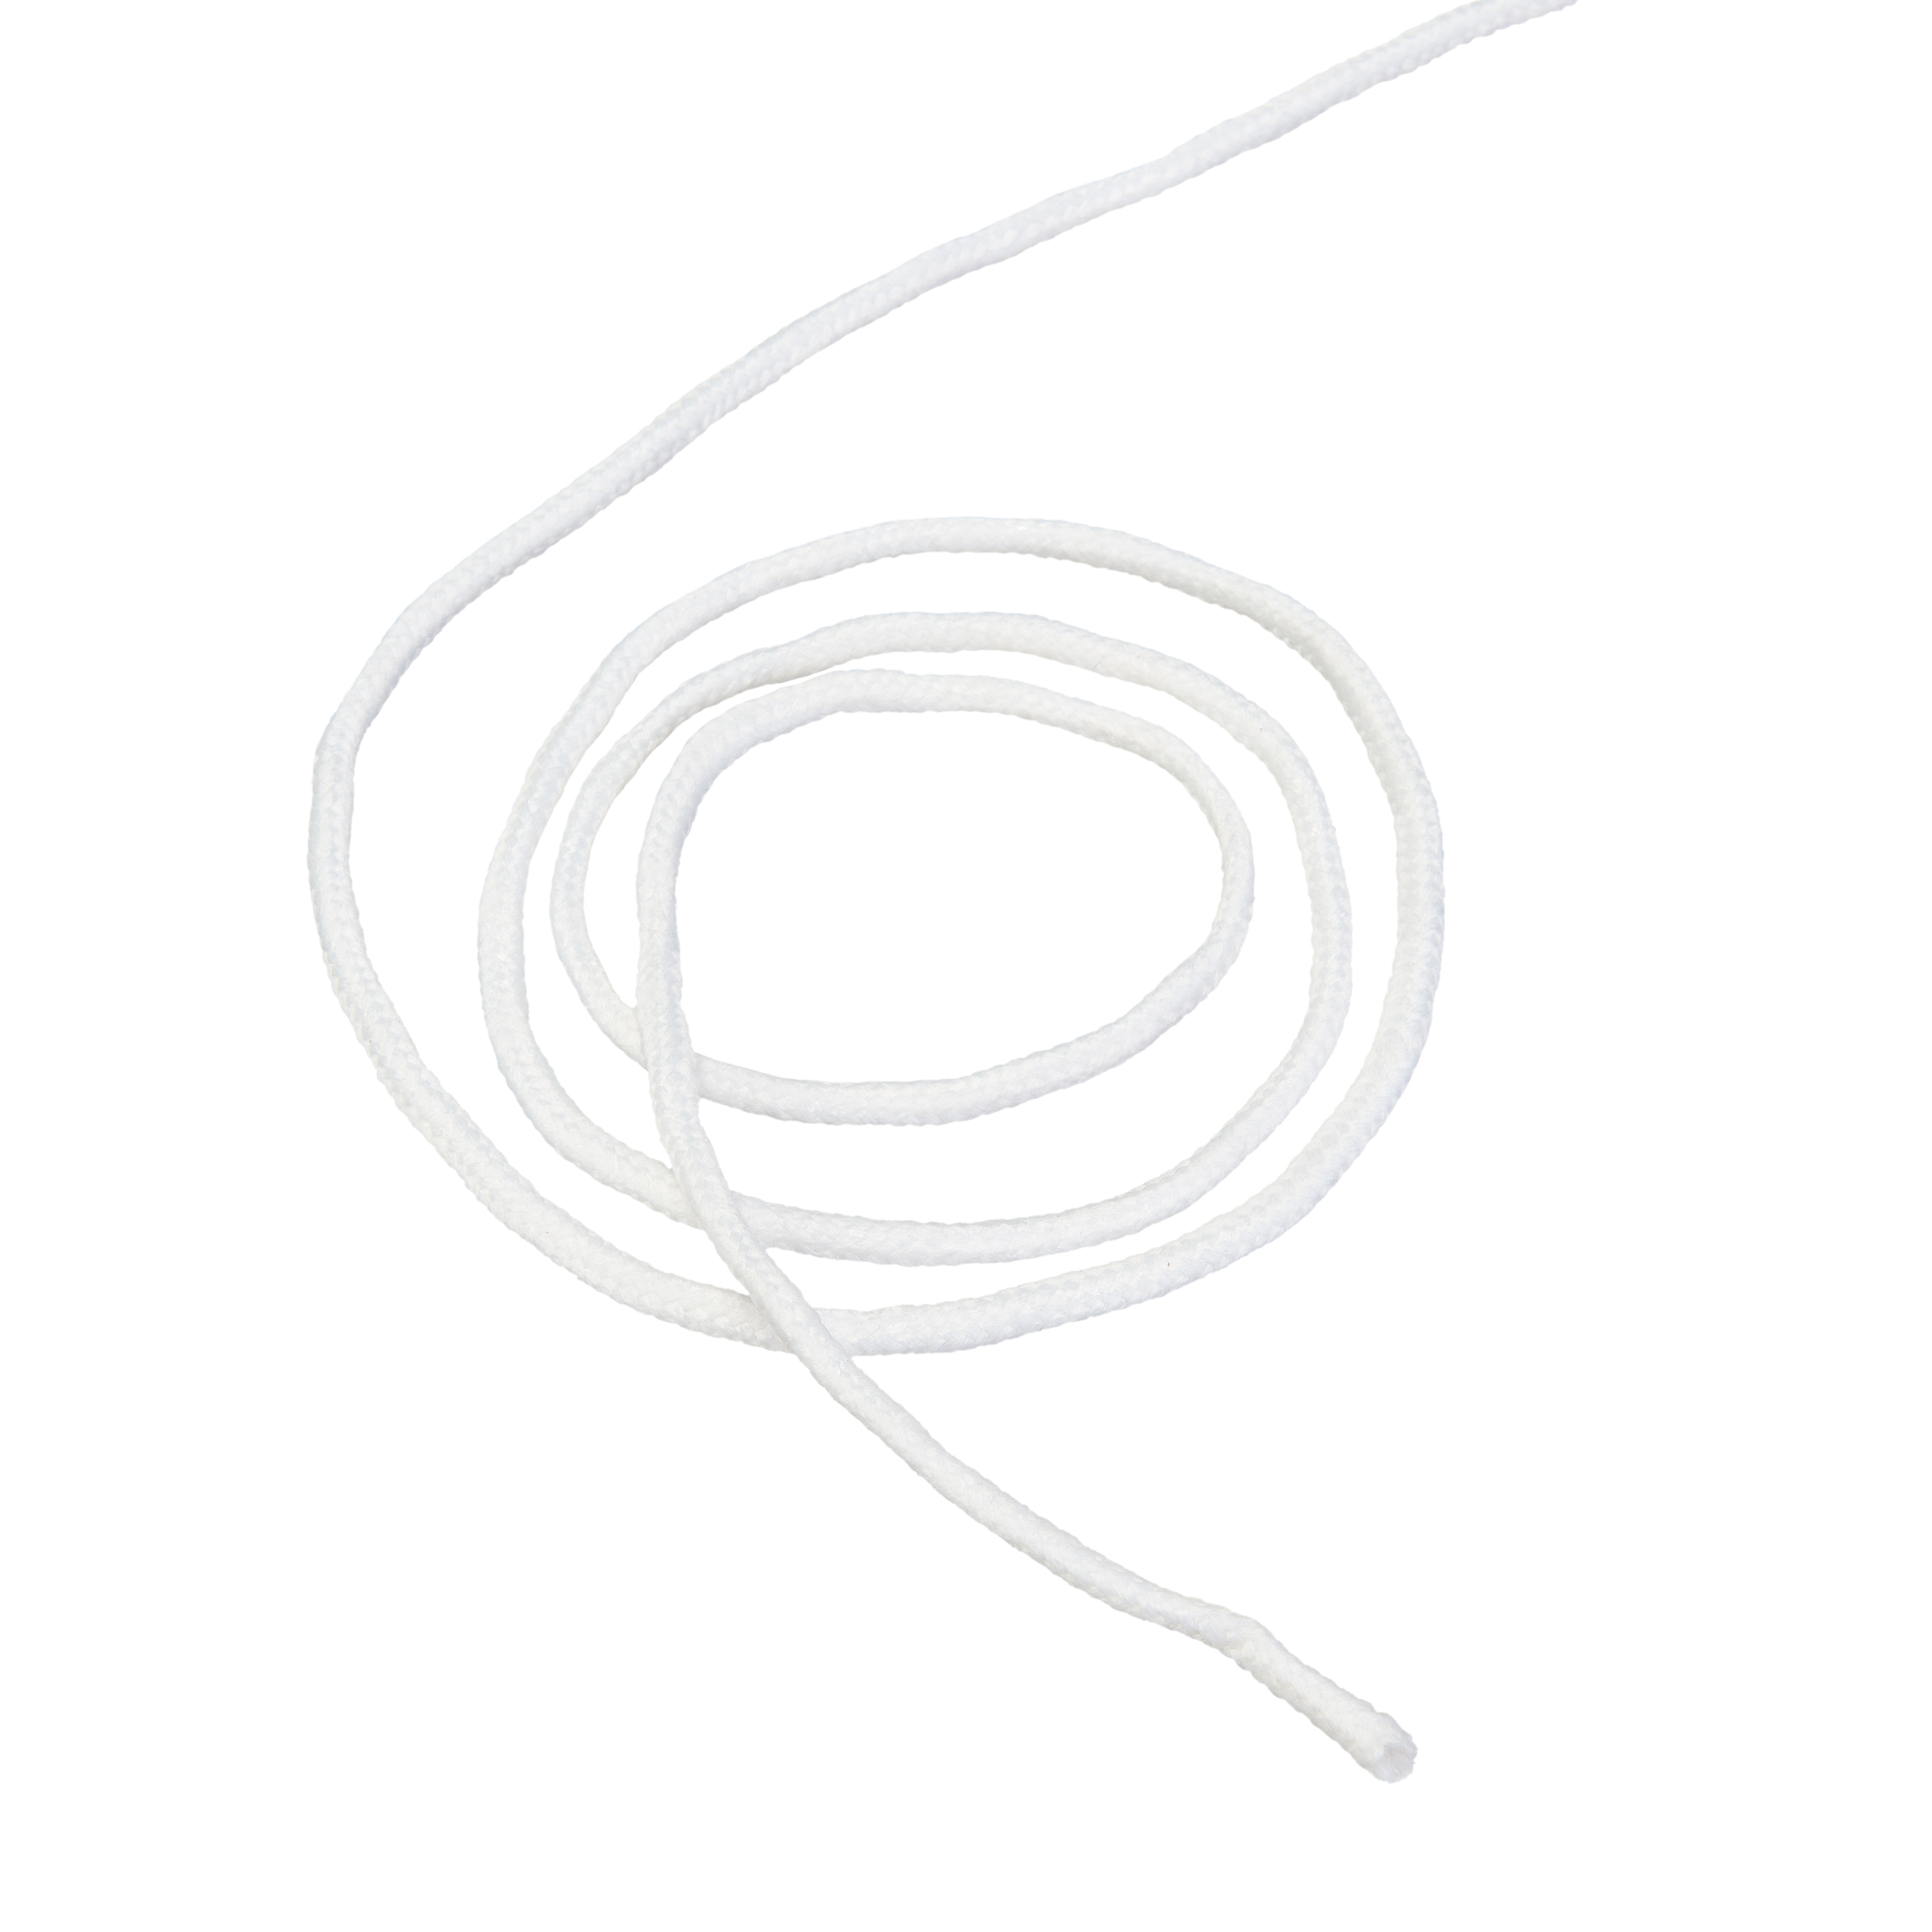 Mainstays Braided Polyester Clothesline, 50 feet, White - image 4 of 6